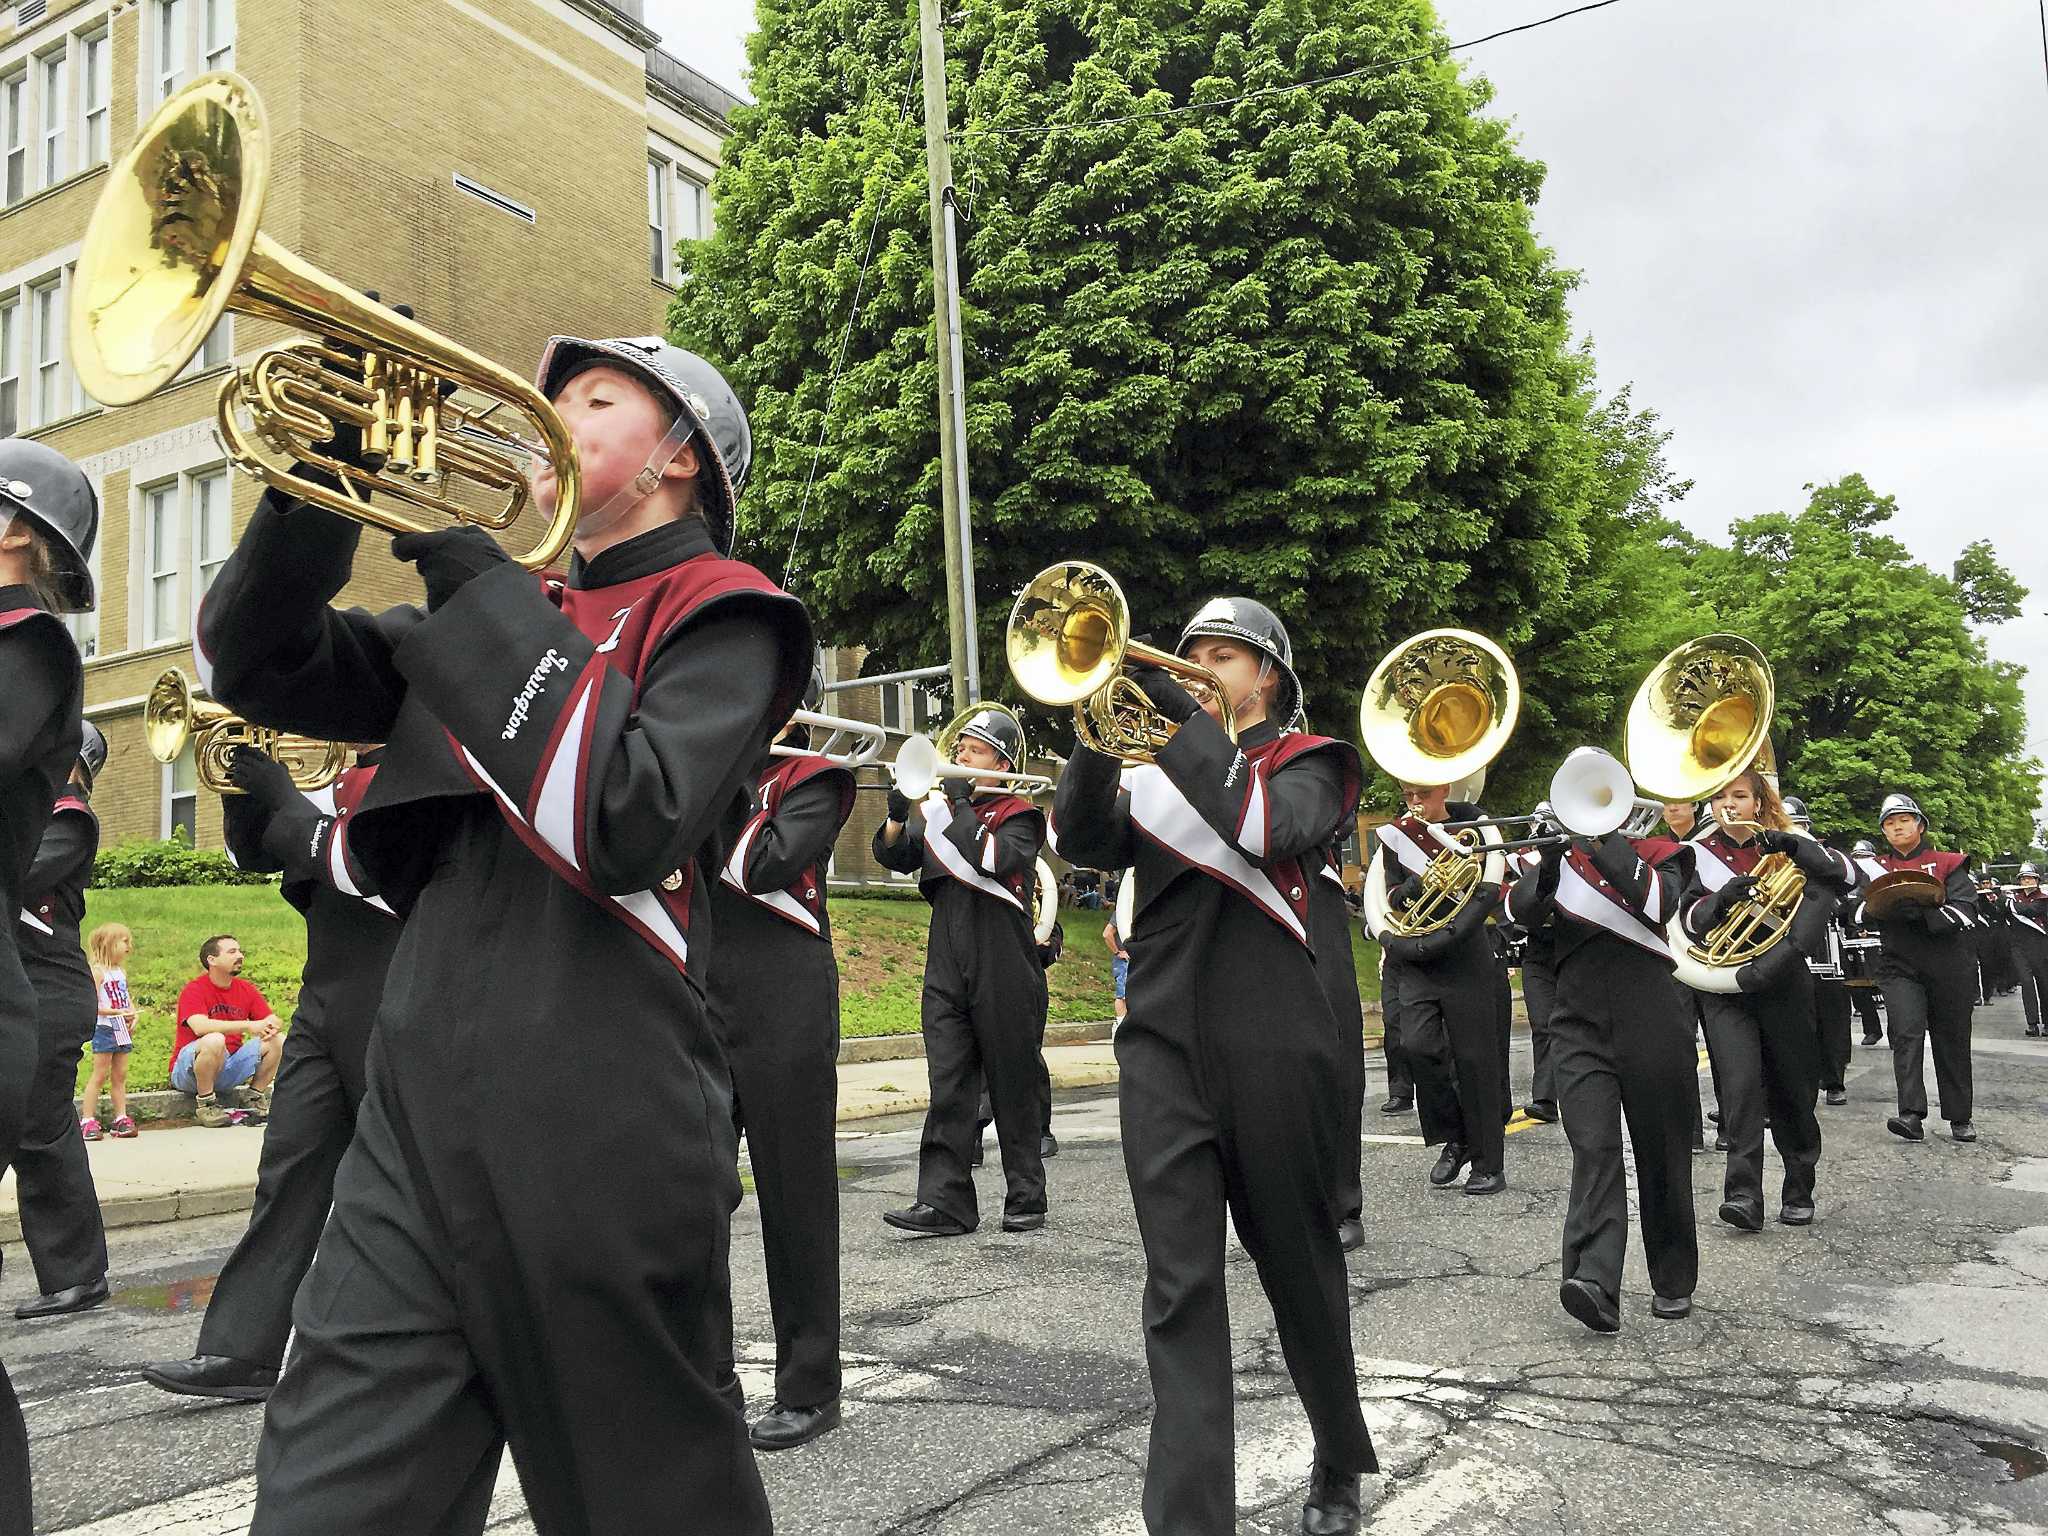 Torrington commemorates Memorial Day with parade and ceremony